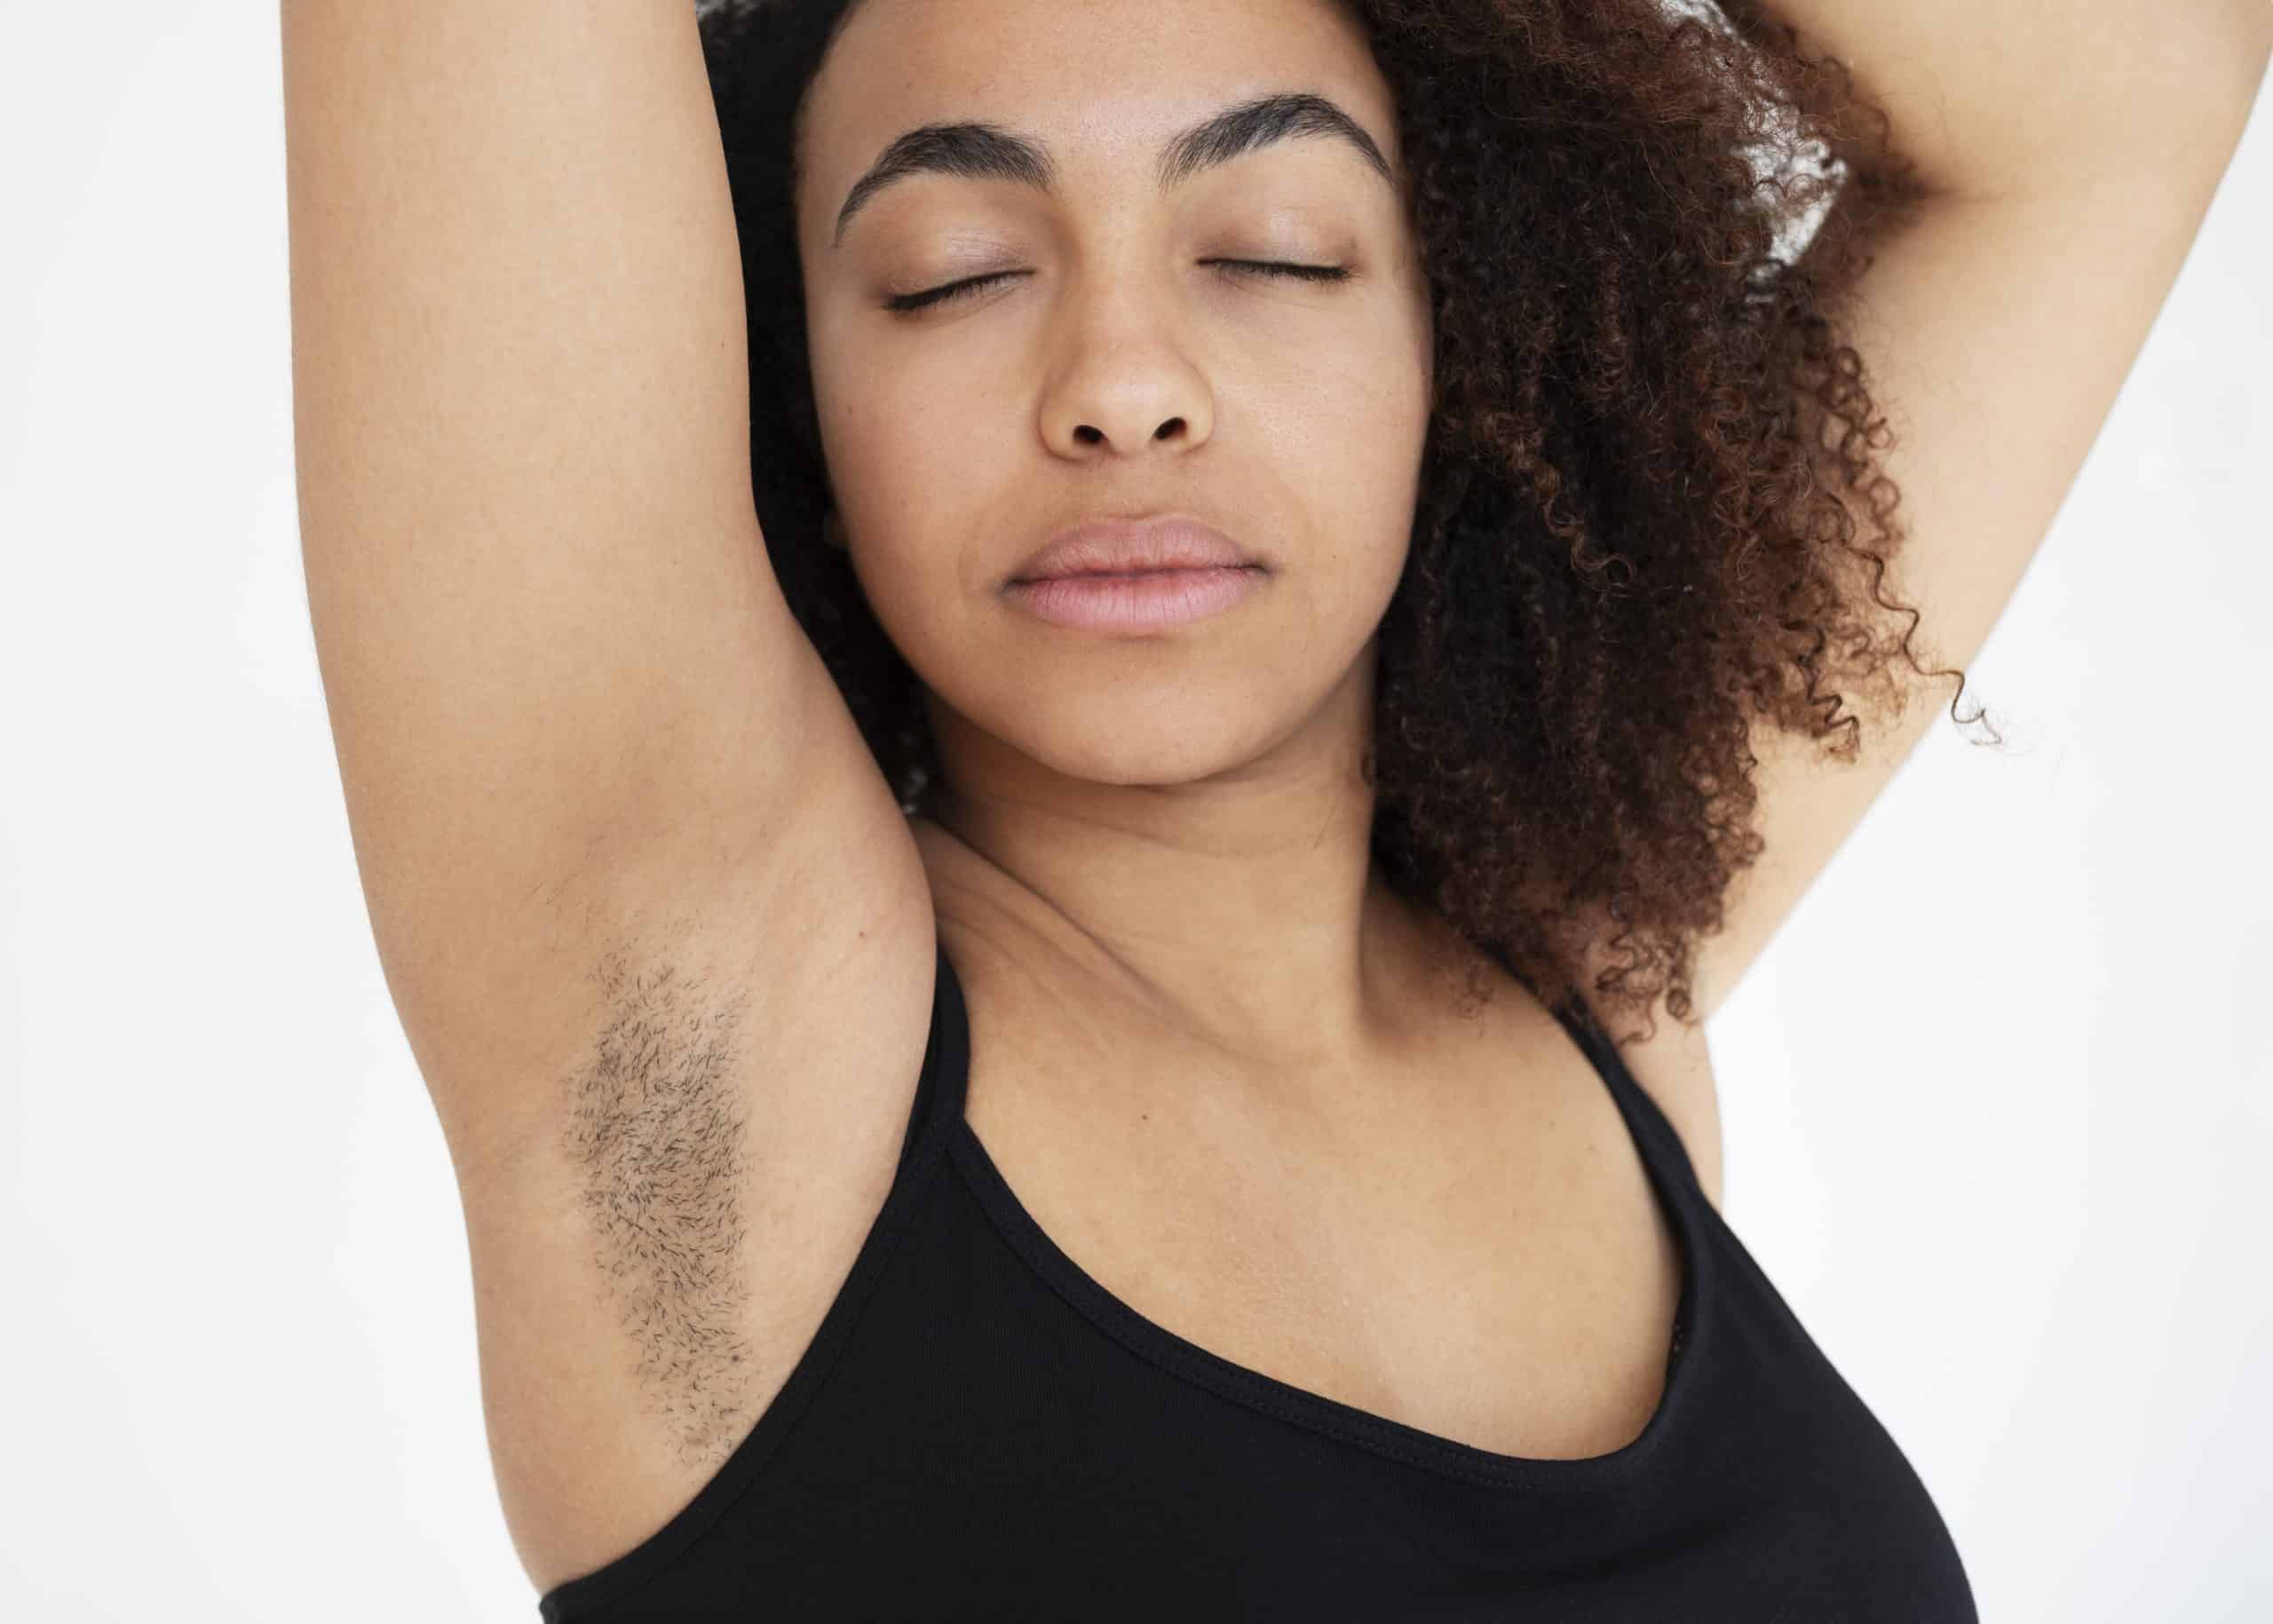 Underarm darkness causes insecurity? Here are 4 ways to lighten it up